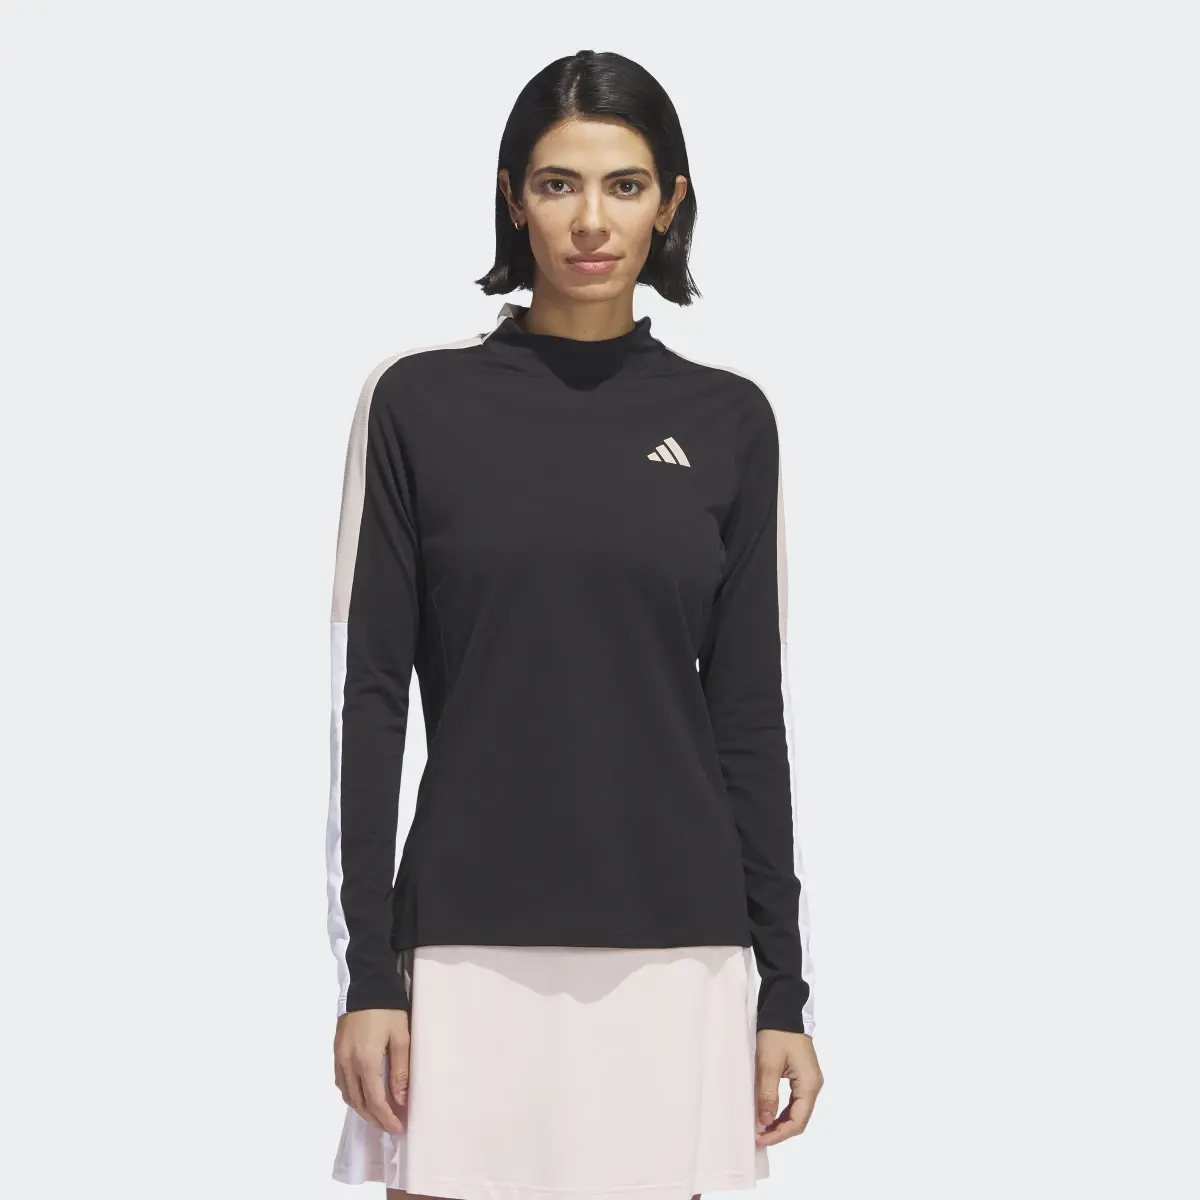 Adidas Made With Nature Mock Neck Tee. 2